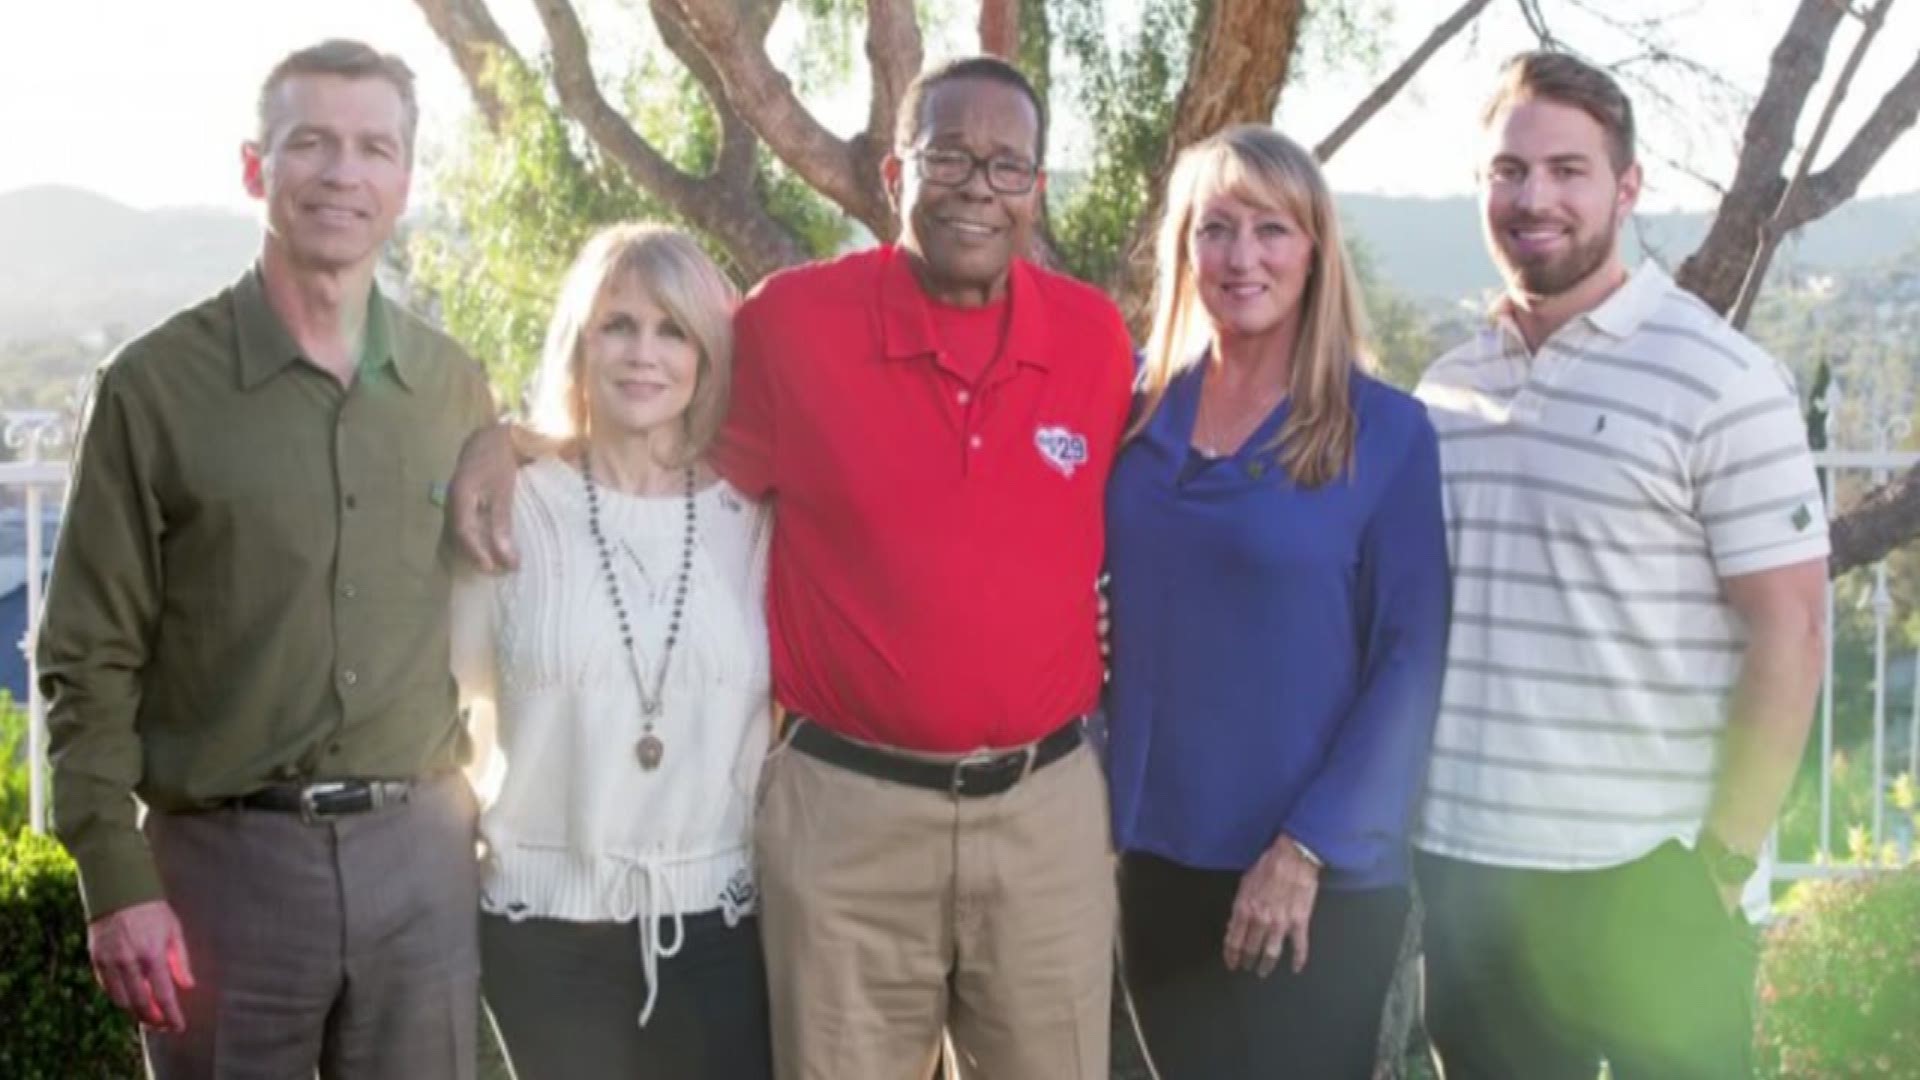 Rod Carew lives on with heart transplant from NFL player